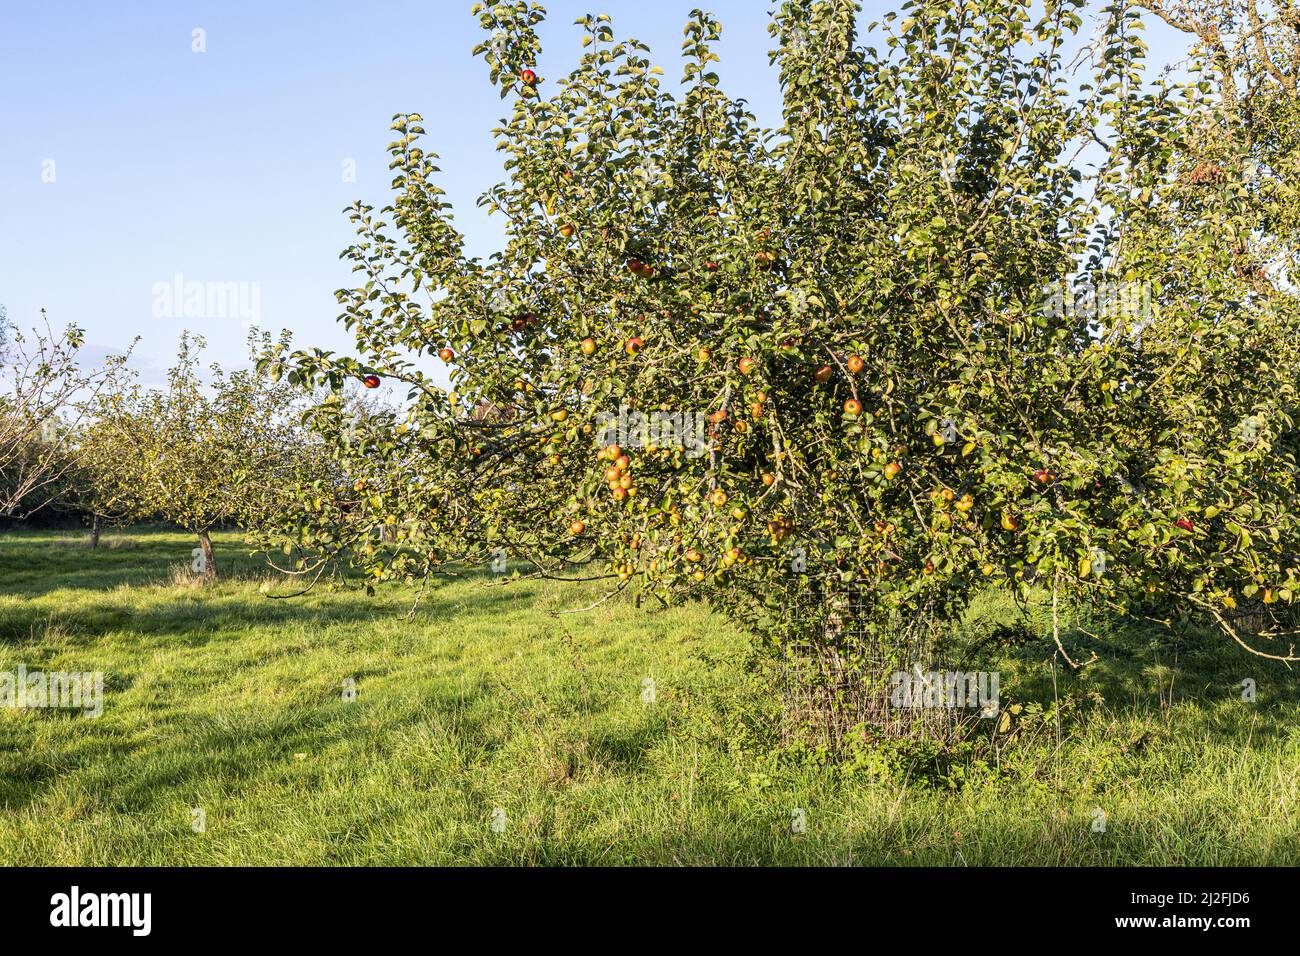 Apples ripening in the autumn in an old orchard in the Severnside village of Arlingham, Gloucestershire, England UK Stock Photo